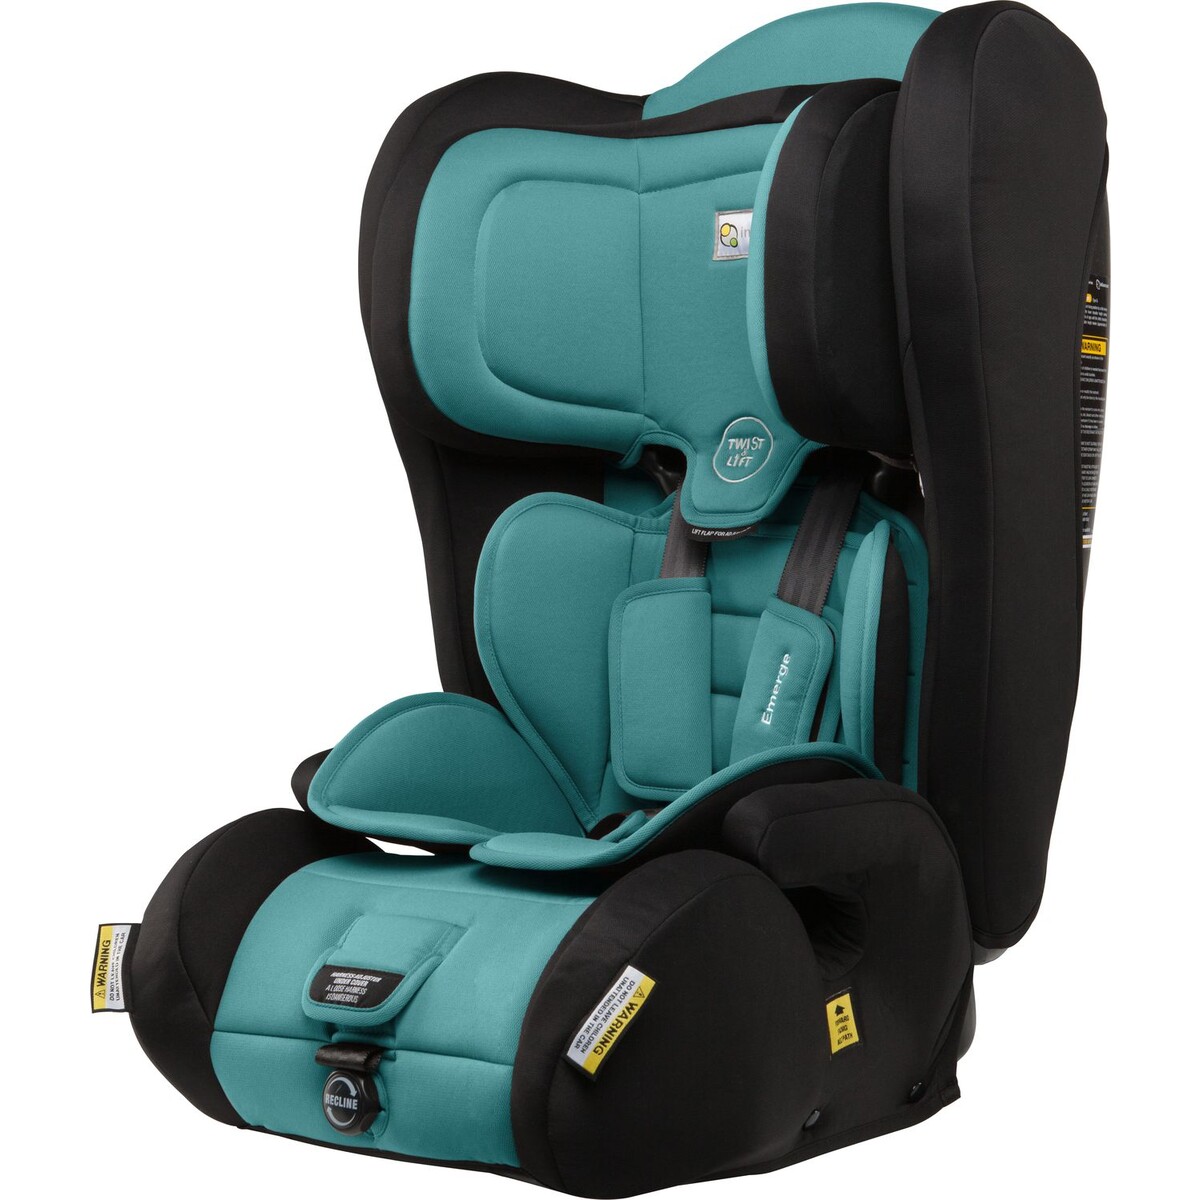 InfaSecure Emerge Astra Forward Facing Car Seat